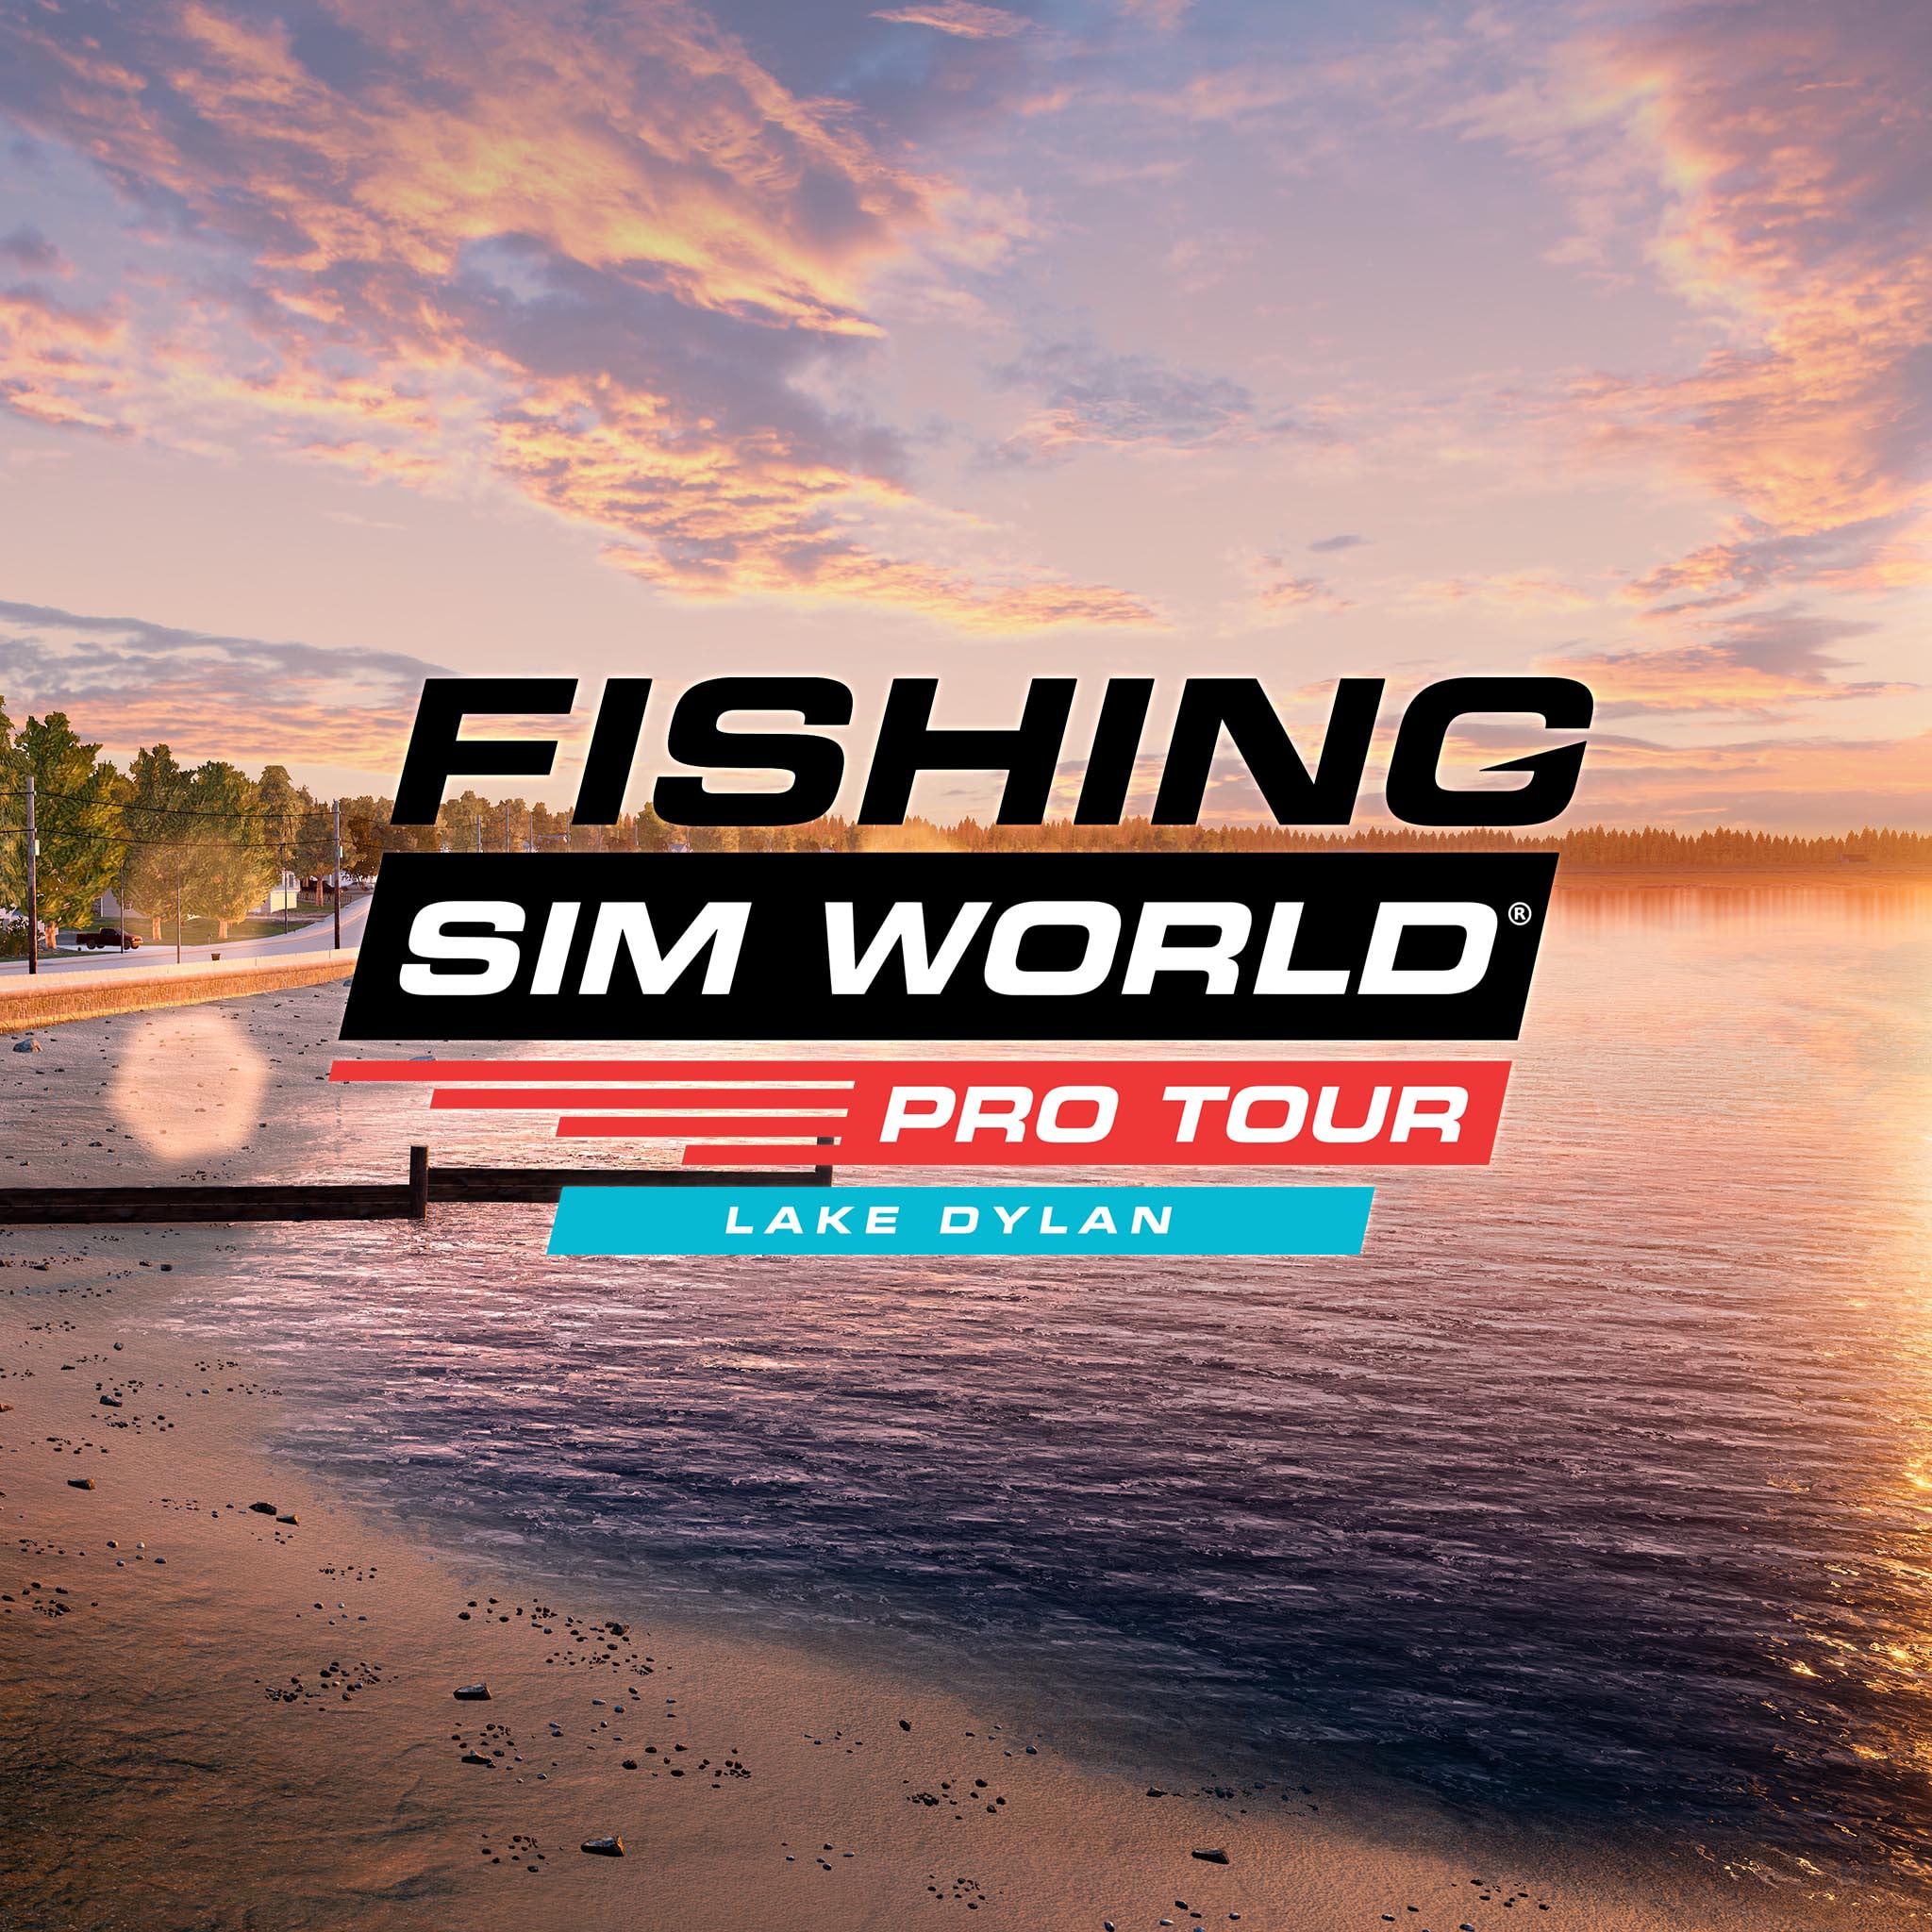 Buy Fishing Sim World: Pro Tour Collector's Edition - PlayStation 4 -  Collector's Edition - English - Free shipping